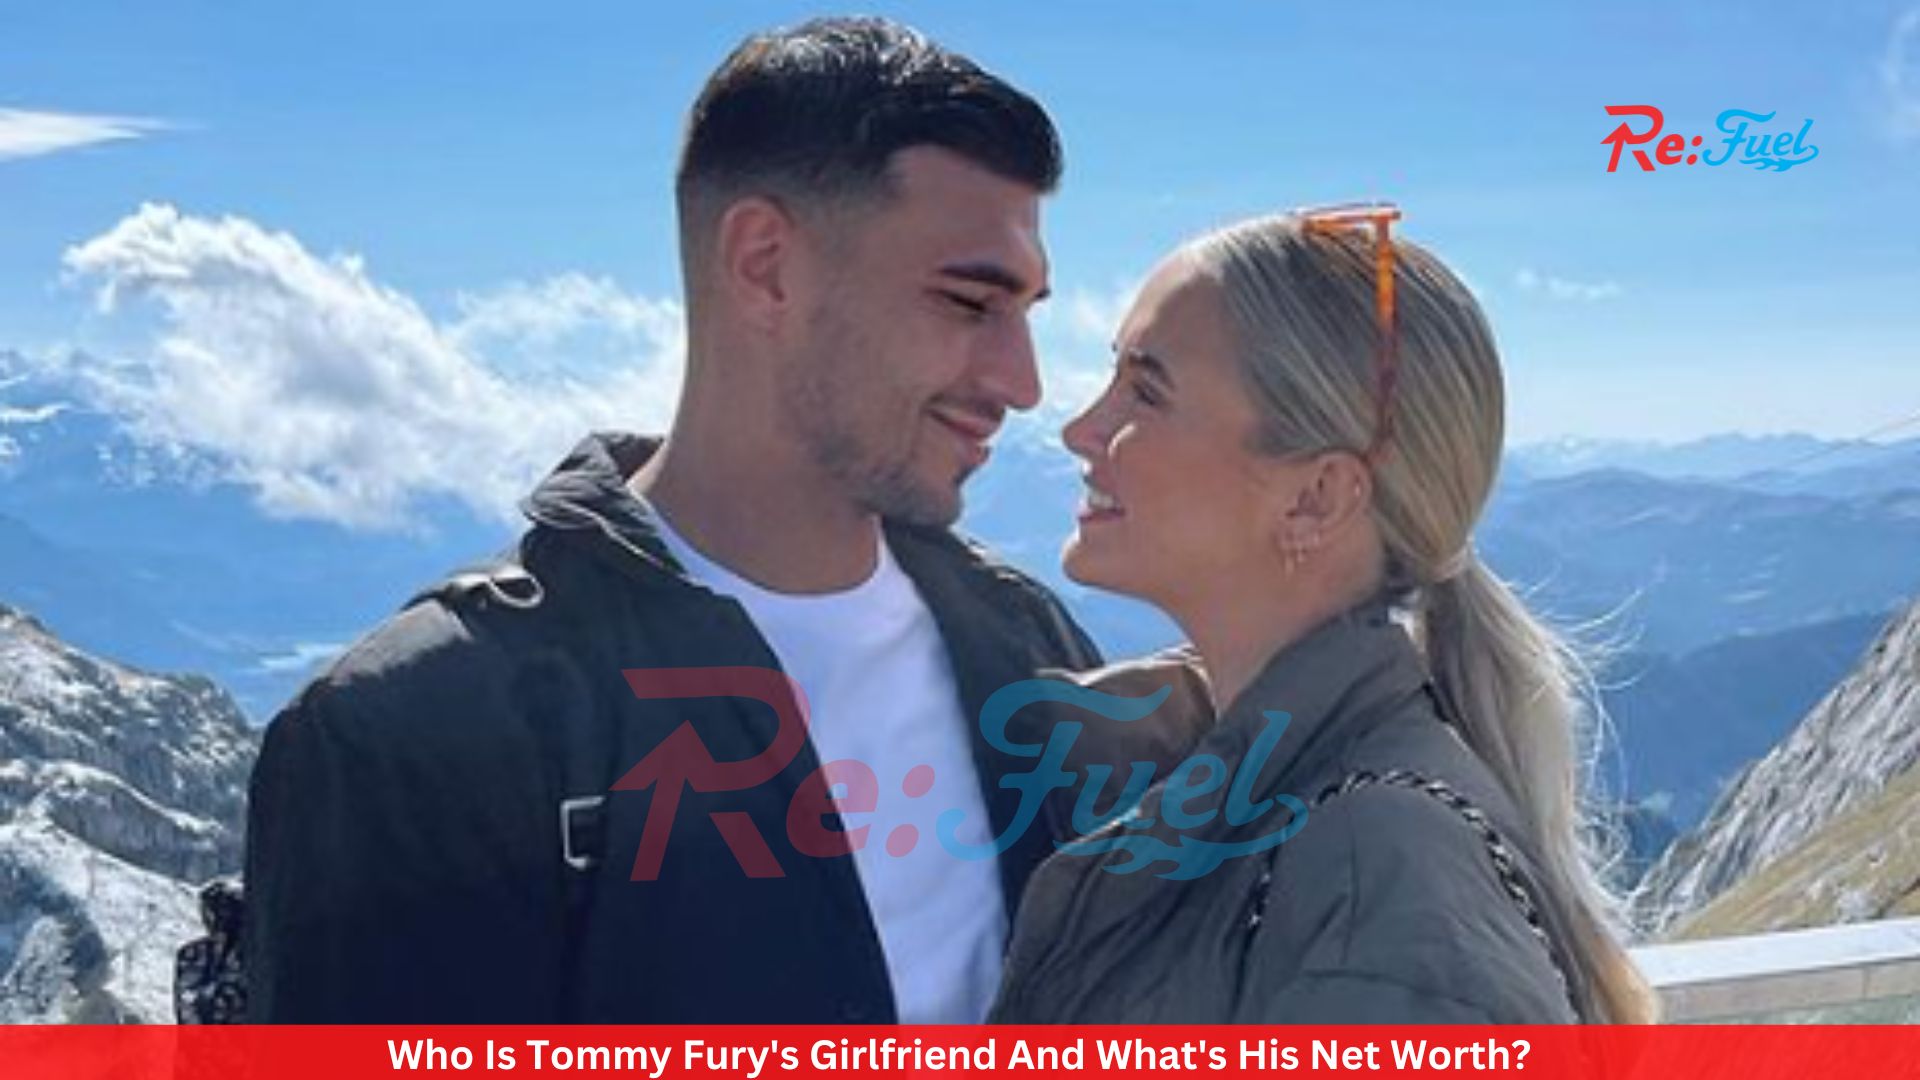 Who Is Tommy Fury's Girlfriend And What's His Net Worth?